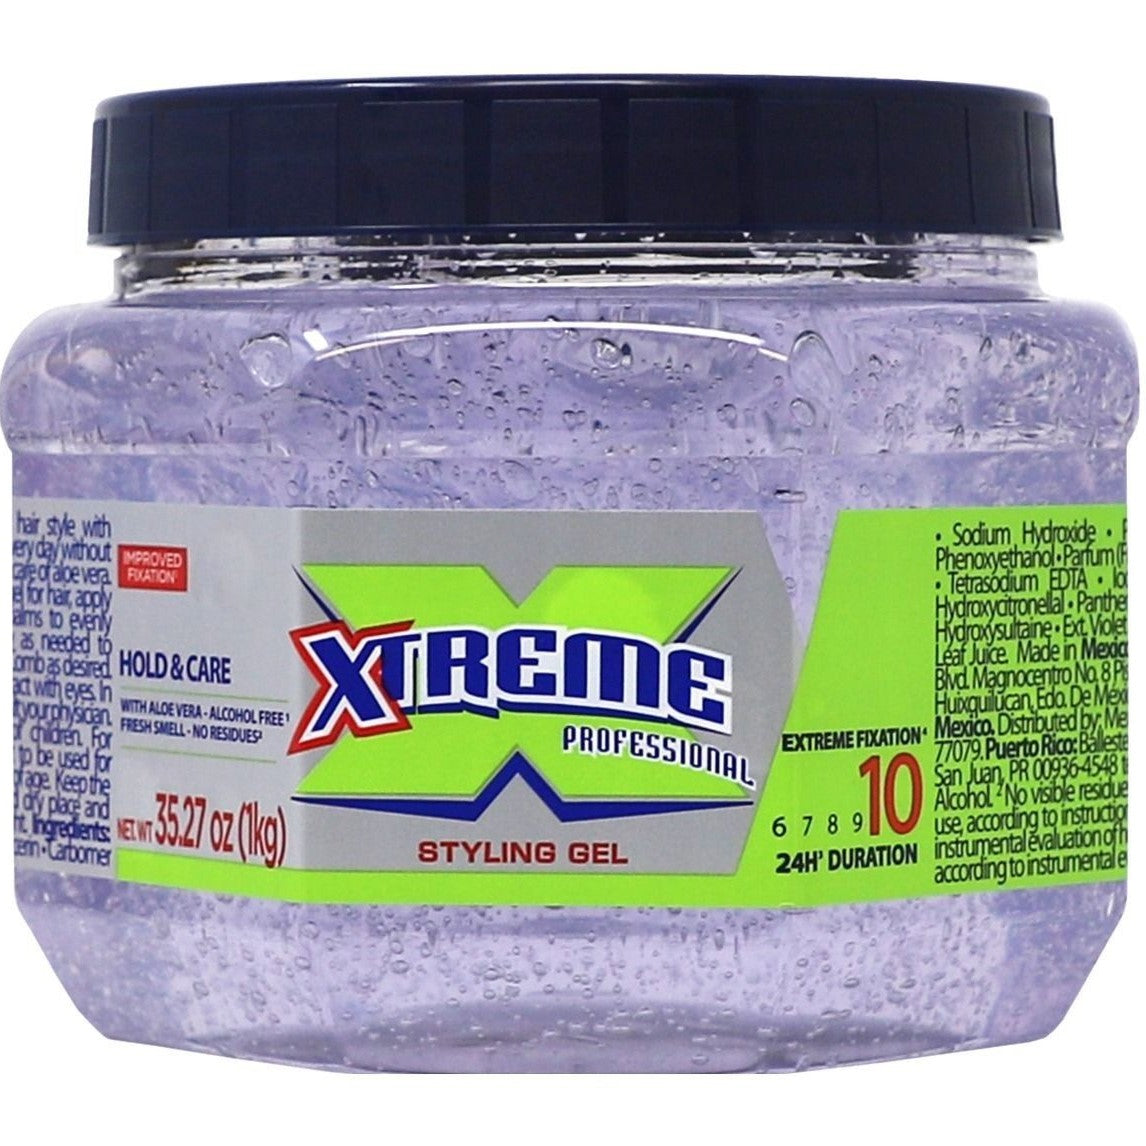 Wet Line Xtreme Clear Professional Styling Gel 35oz / 1 Kg